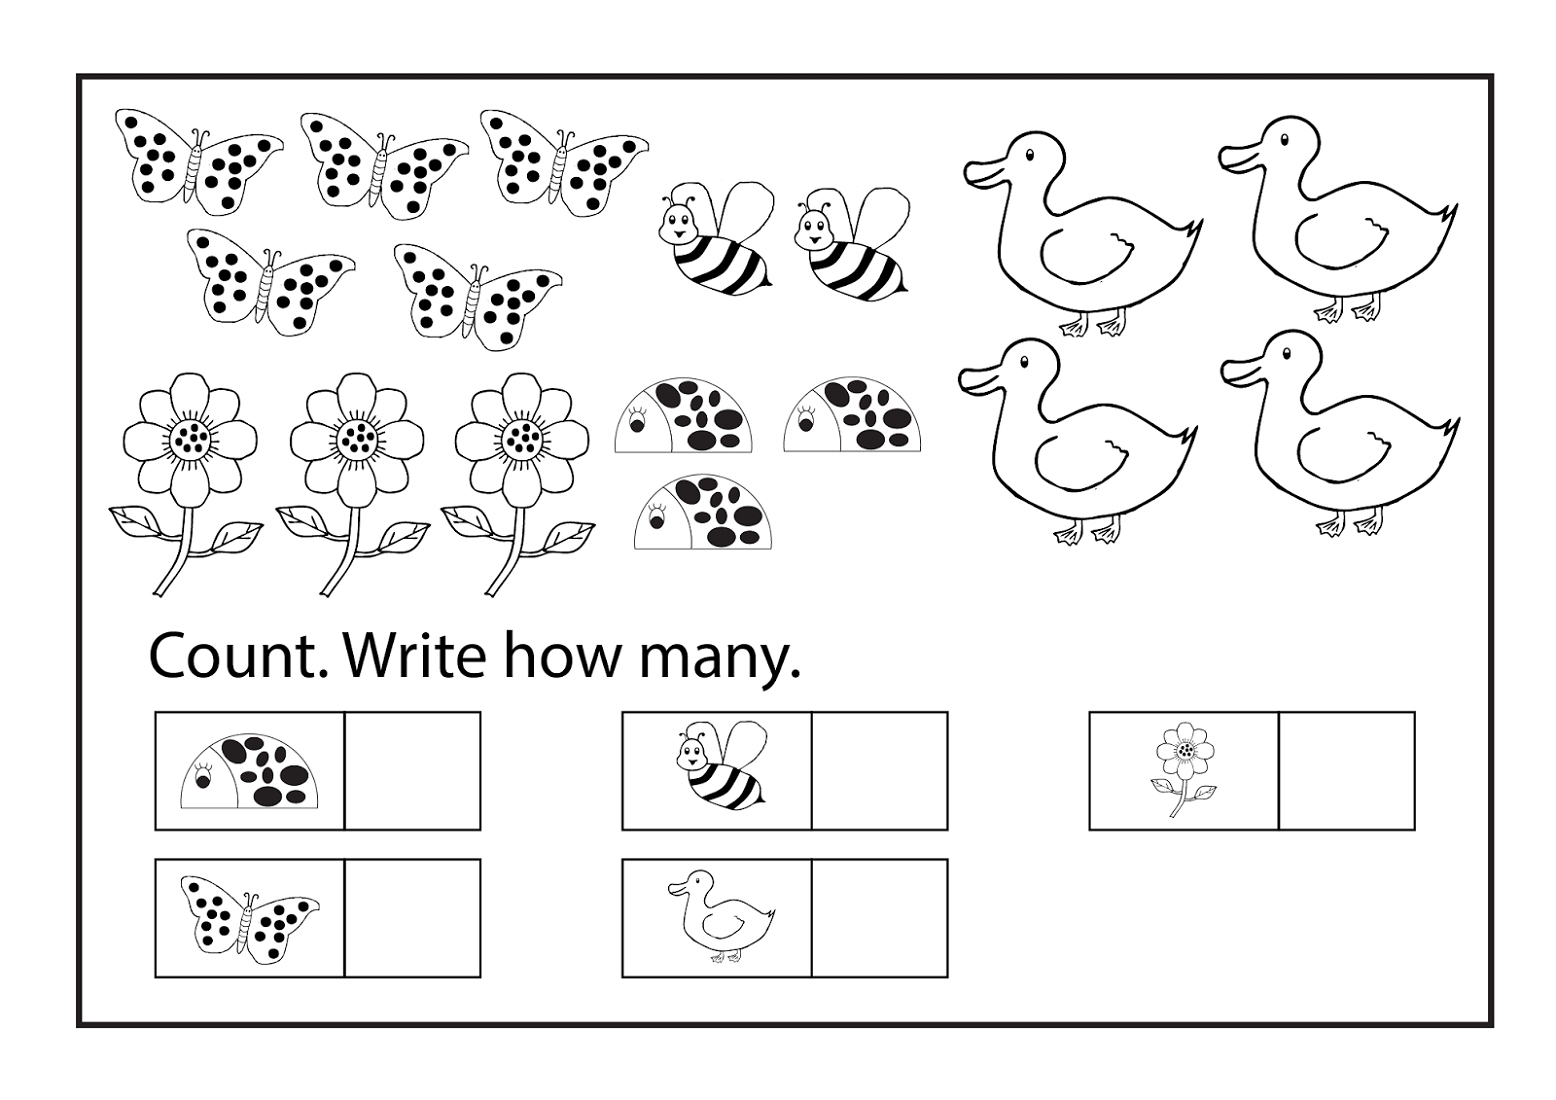 Free Printable Activities For 6 Year Olds – Jowo - Free Printable Activities For 6 Year Olds